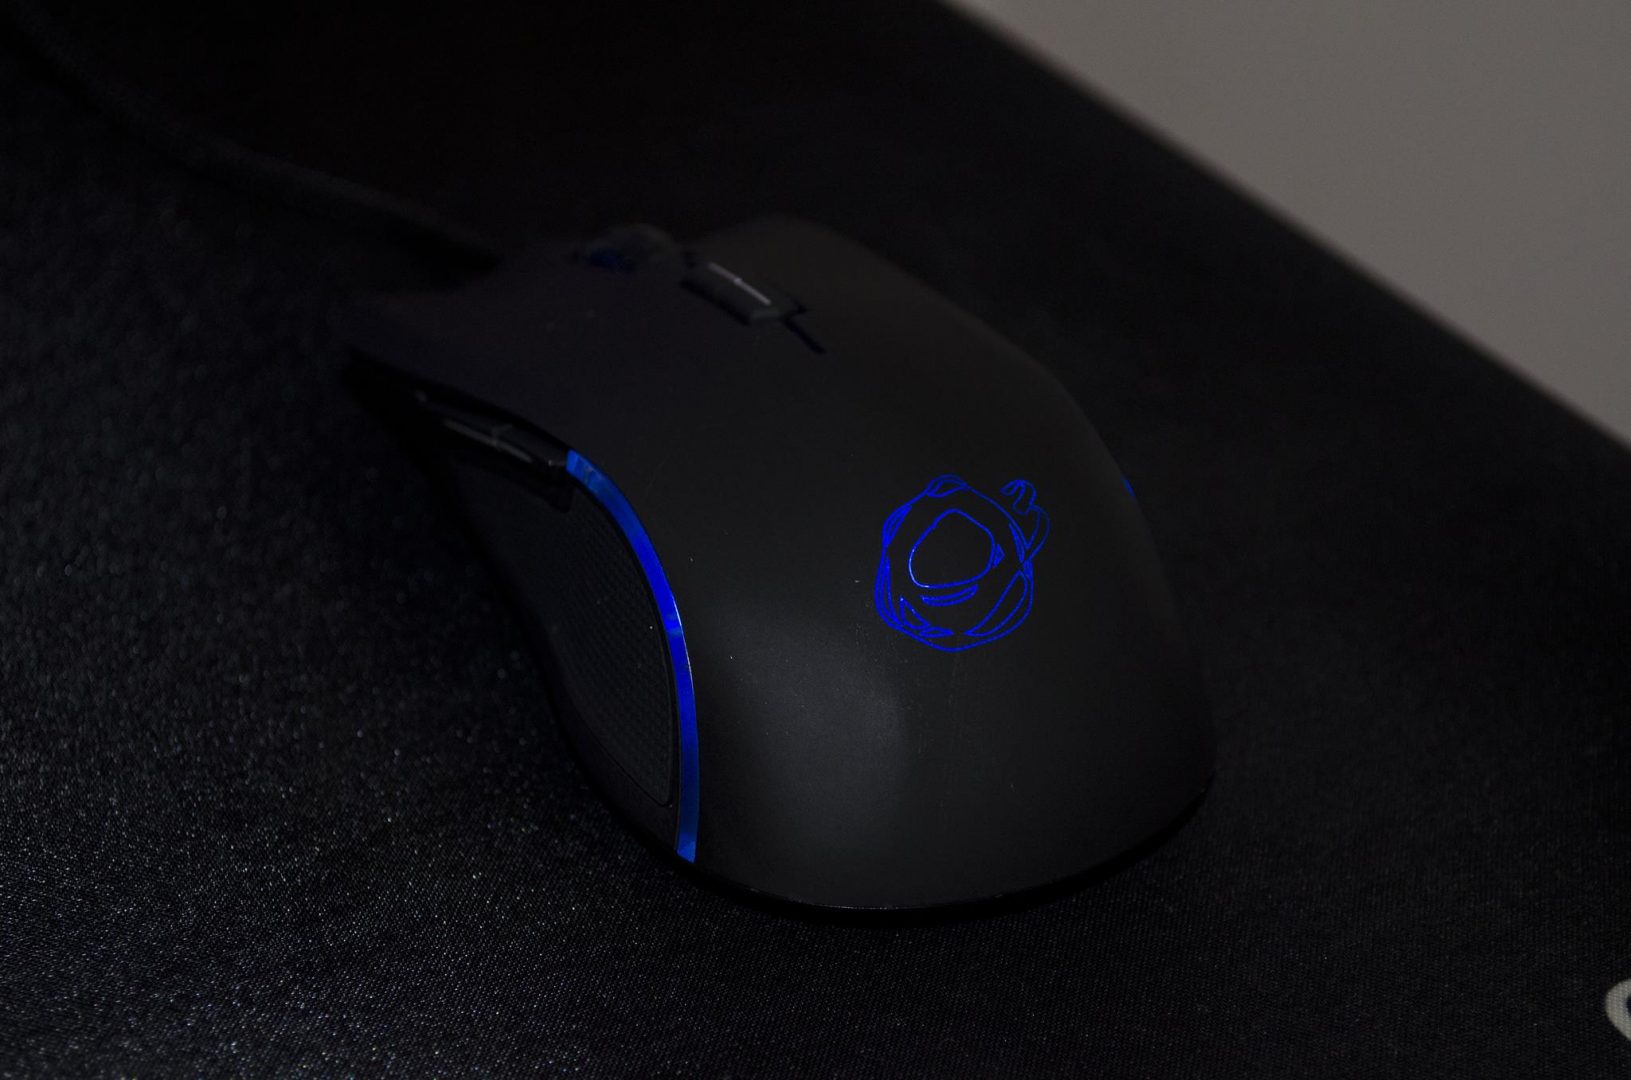 Ozone Argon Advanced Pro Gaming Mouse Review